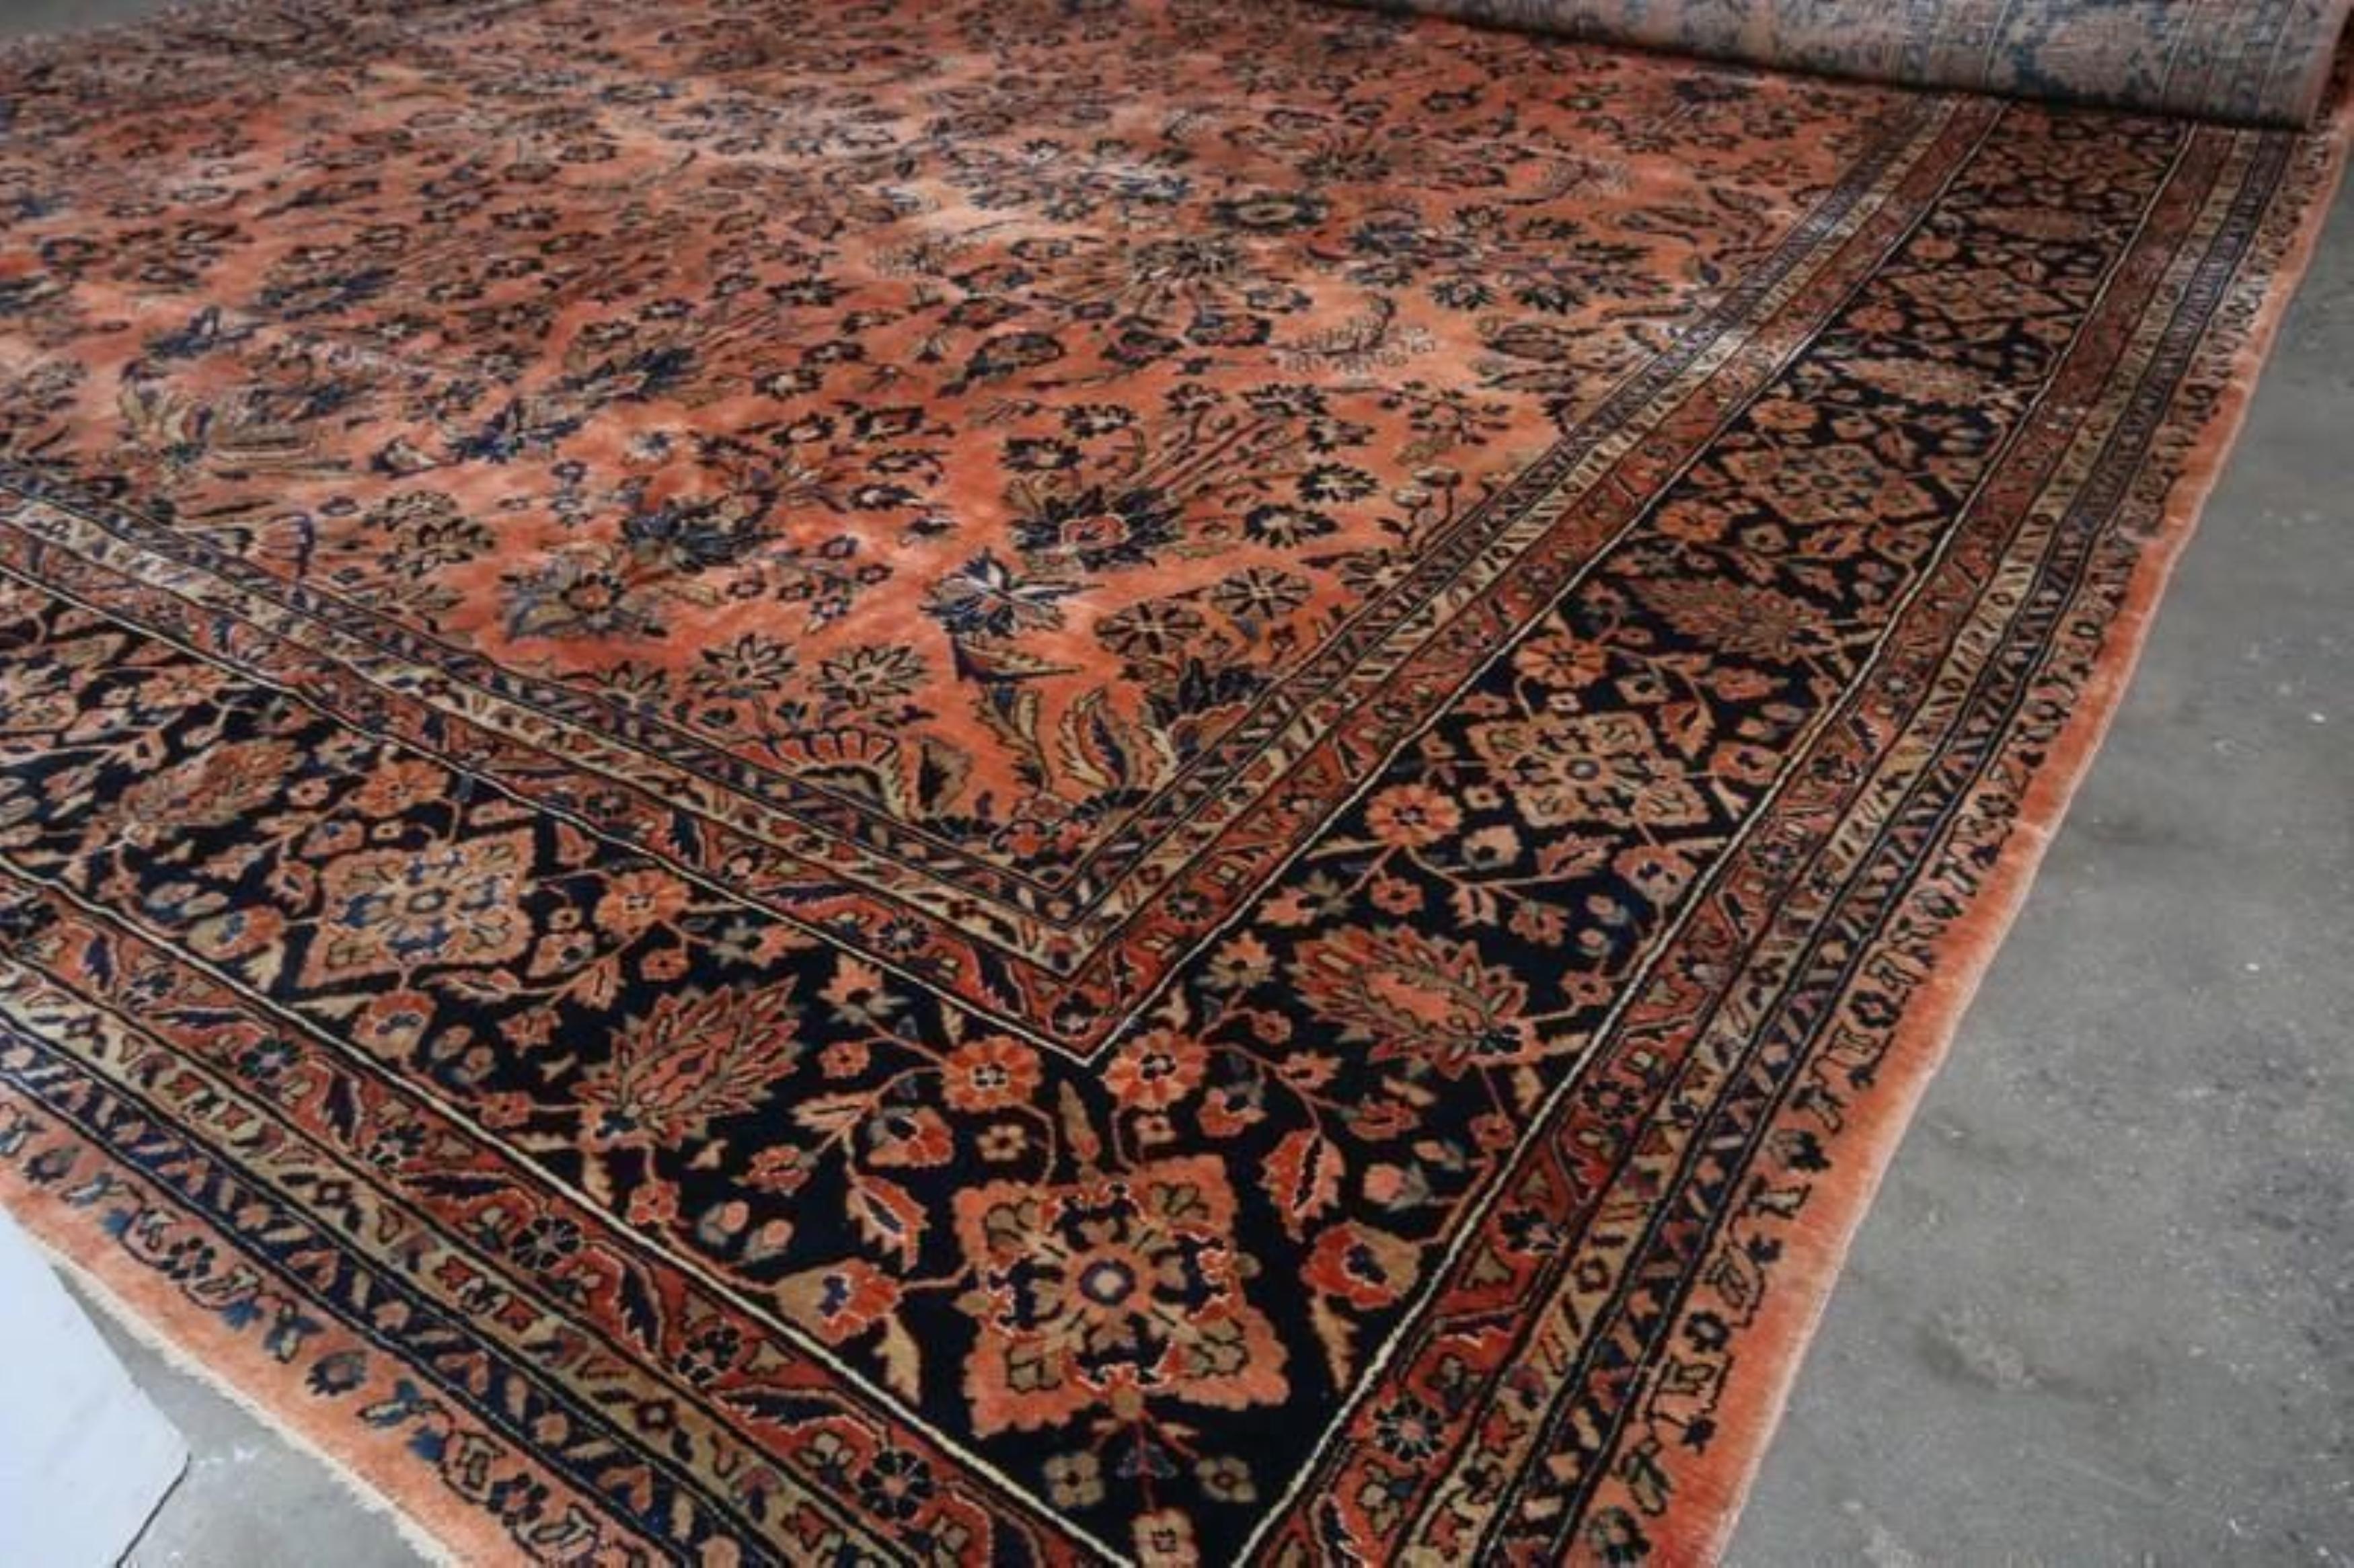  A 12x21 antique Persian rug of Sarouk lineage, hand knotted in wool circa 1920-1930. Enjoying one of the most exciting pallets of a traditional rug in a rich blue and orange, playing with black and red tones across a gracious all over floral